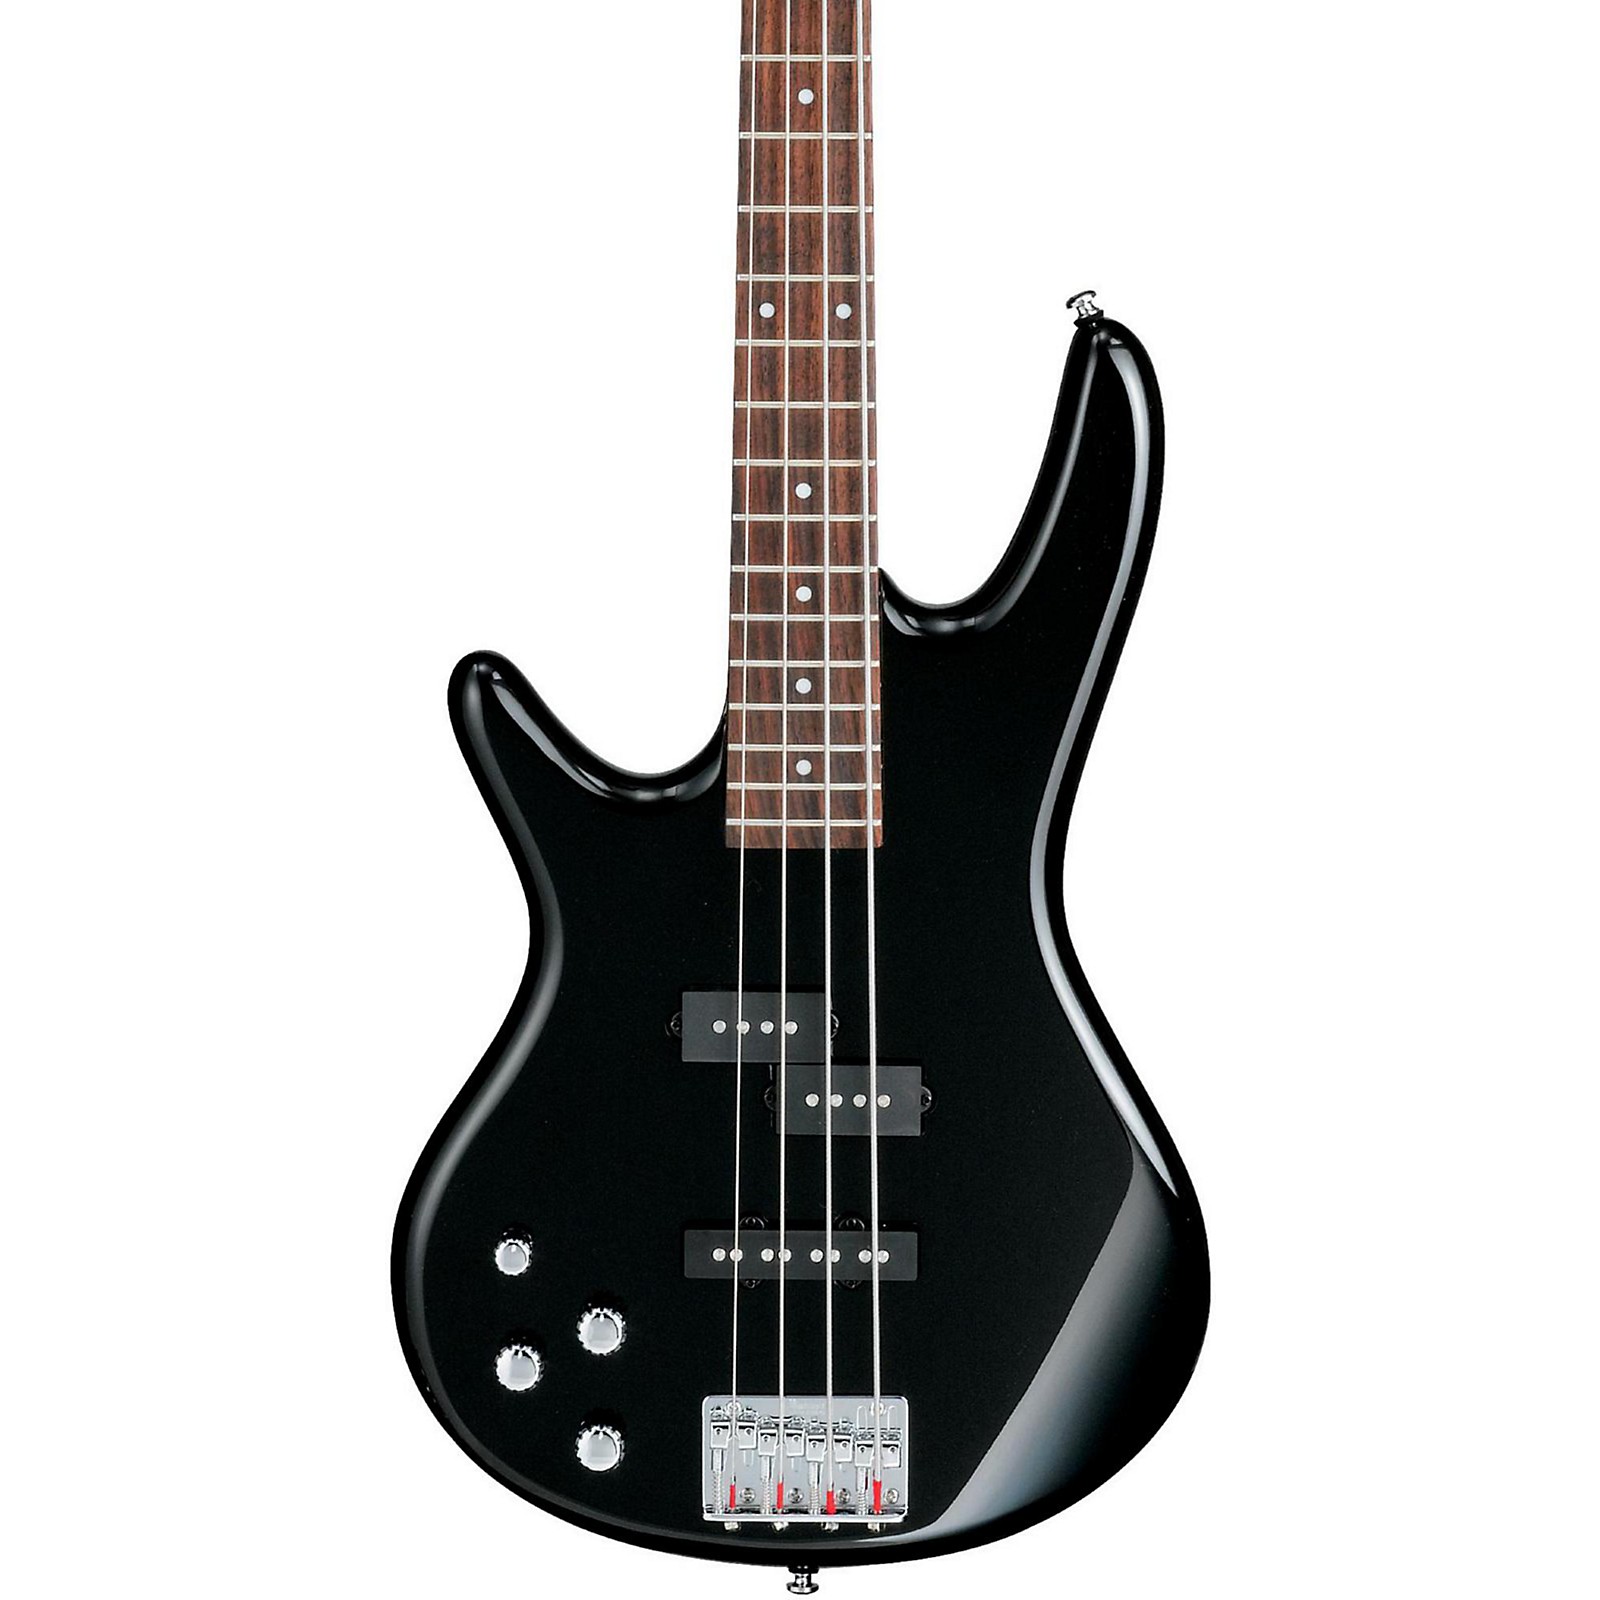 most stringed bass guitar